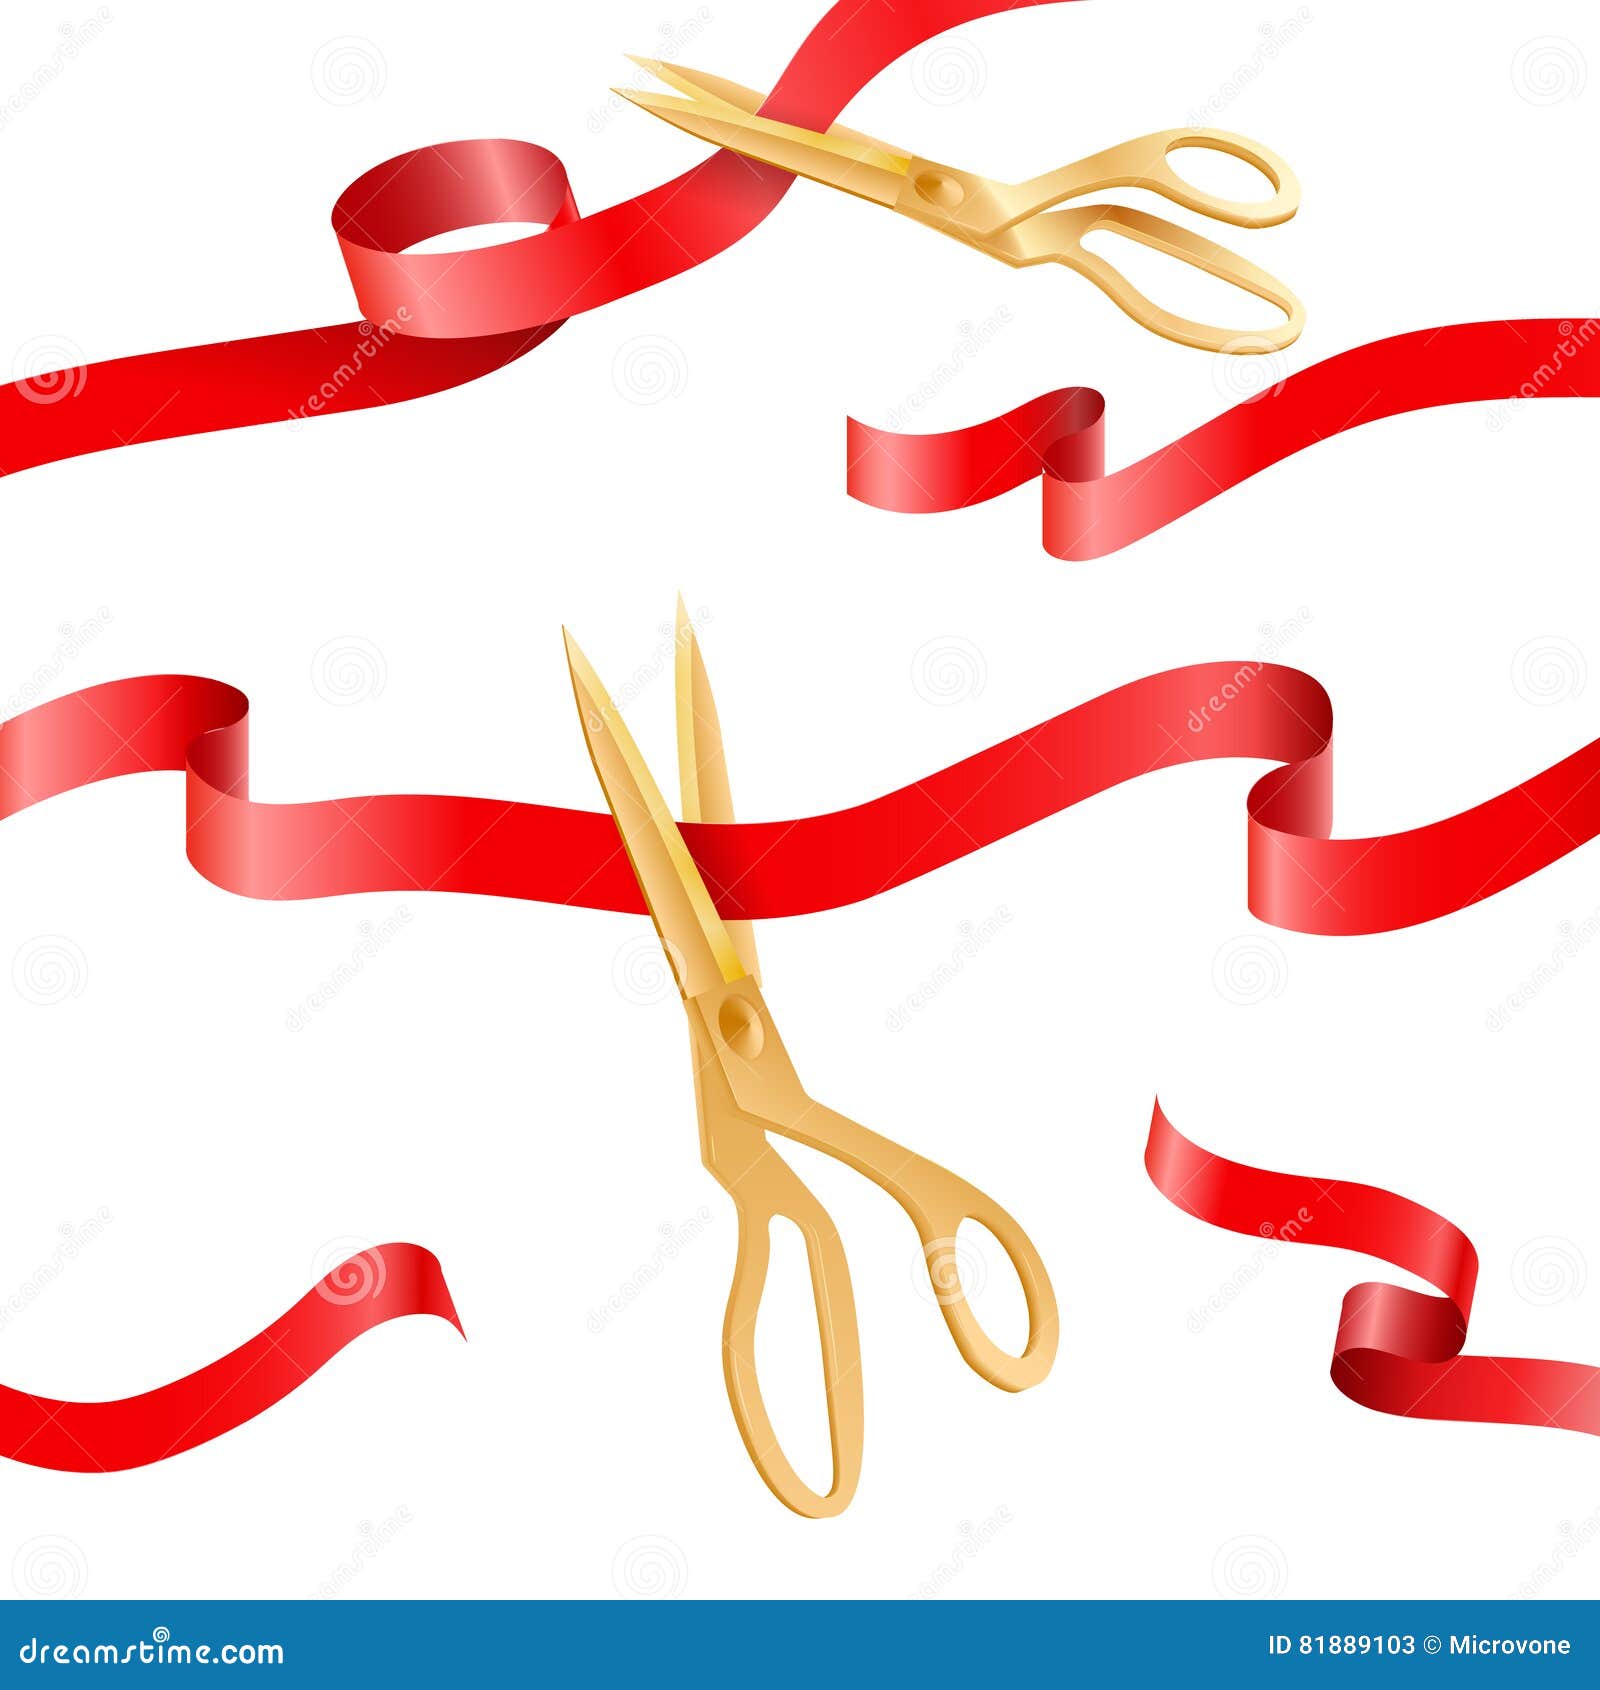 Golden scissors cut the red ribbon Royalty Free Vector Image